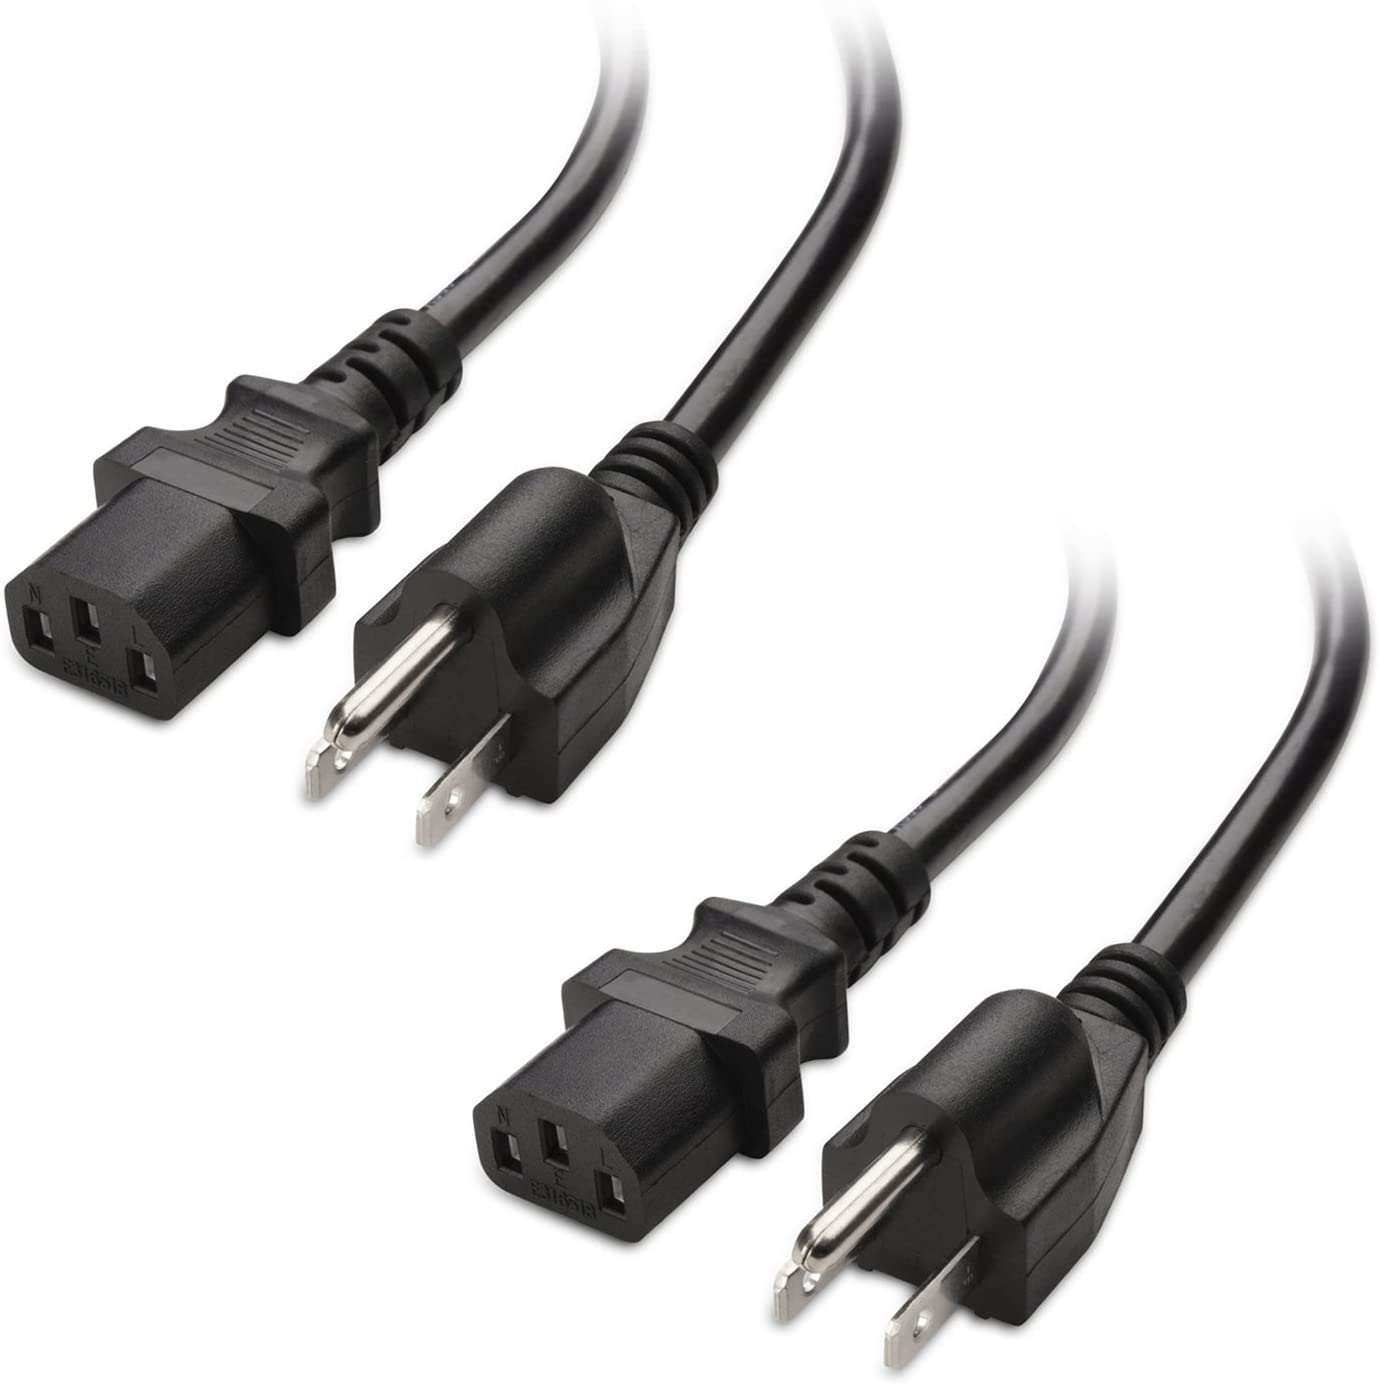 Cable Matters 2-Pack 16 AWG Heavy Duty 3 Prong Computer Monitor Power Cord